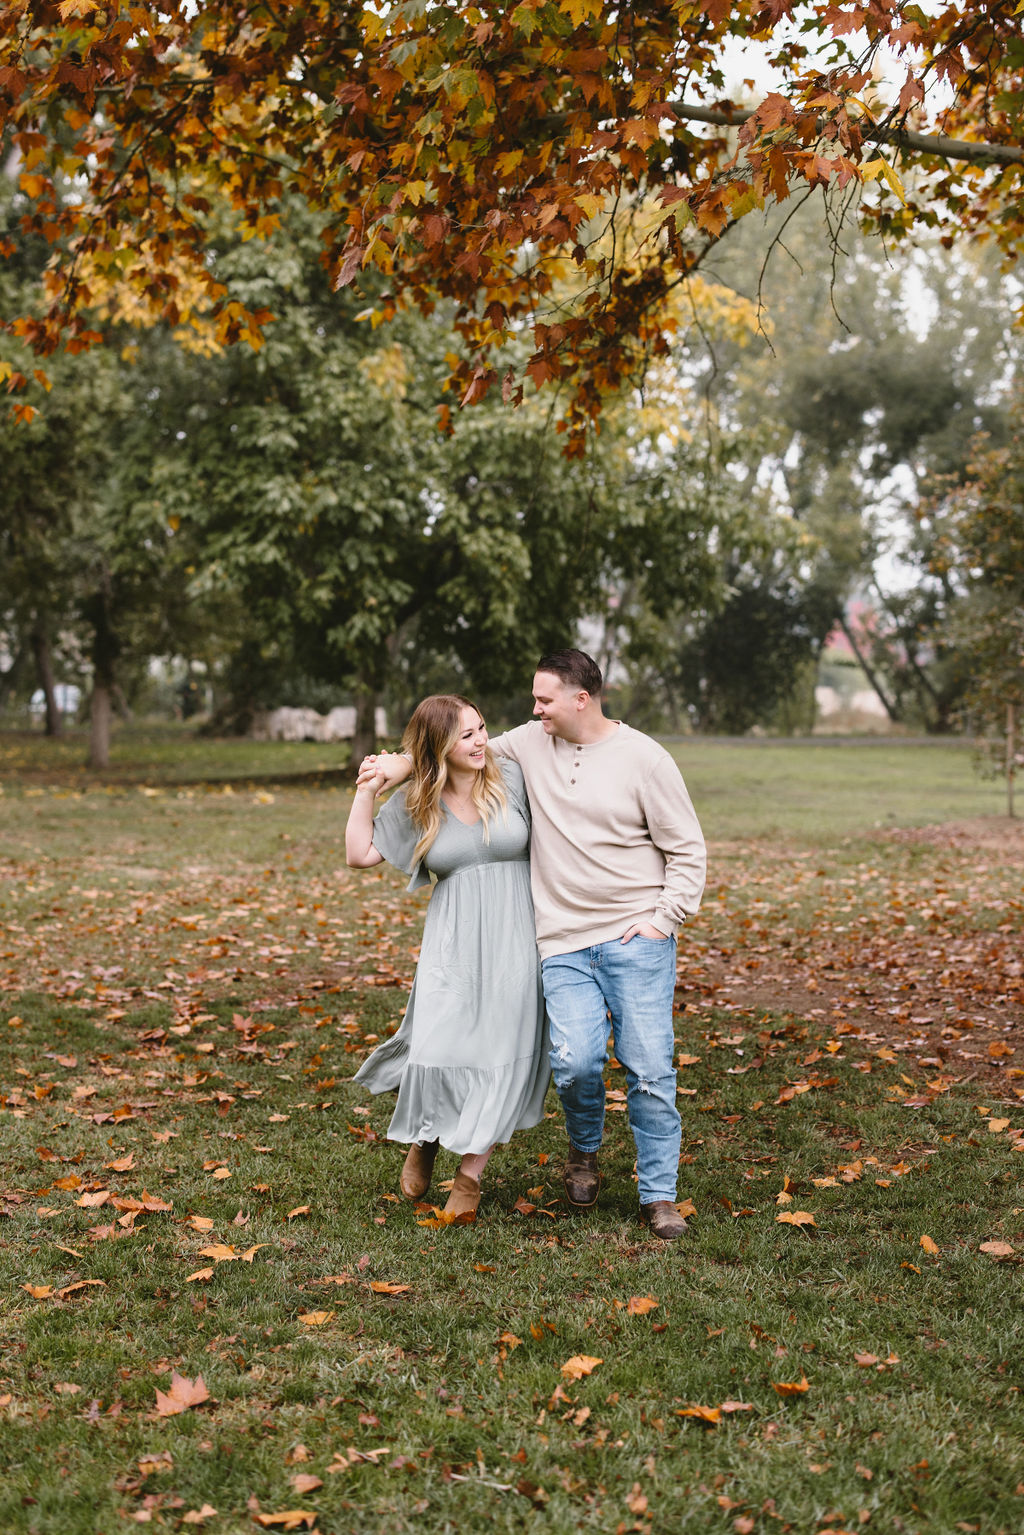 Fall Couples Photoshoot At Cottonwood Park